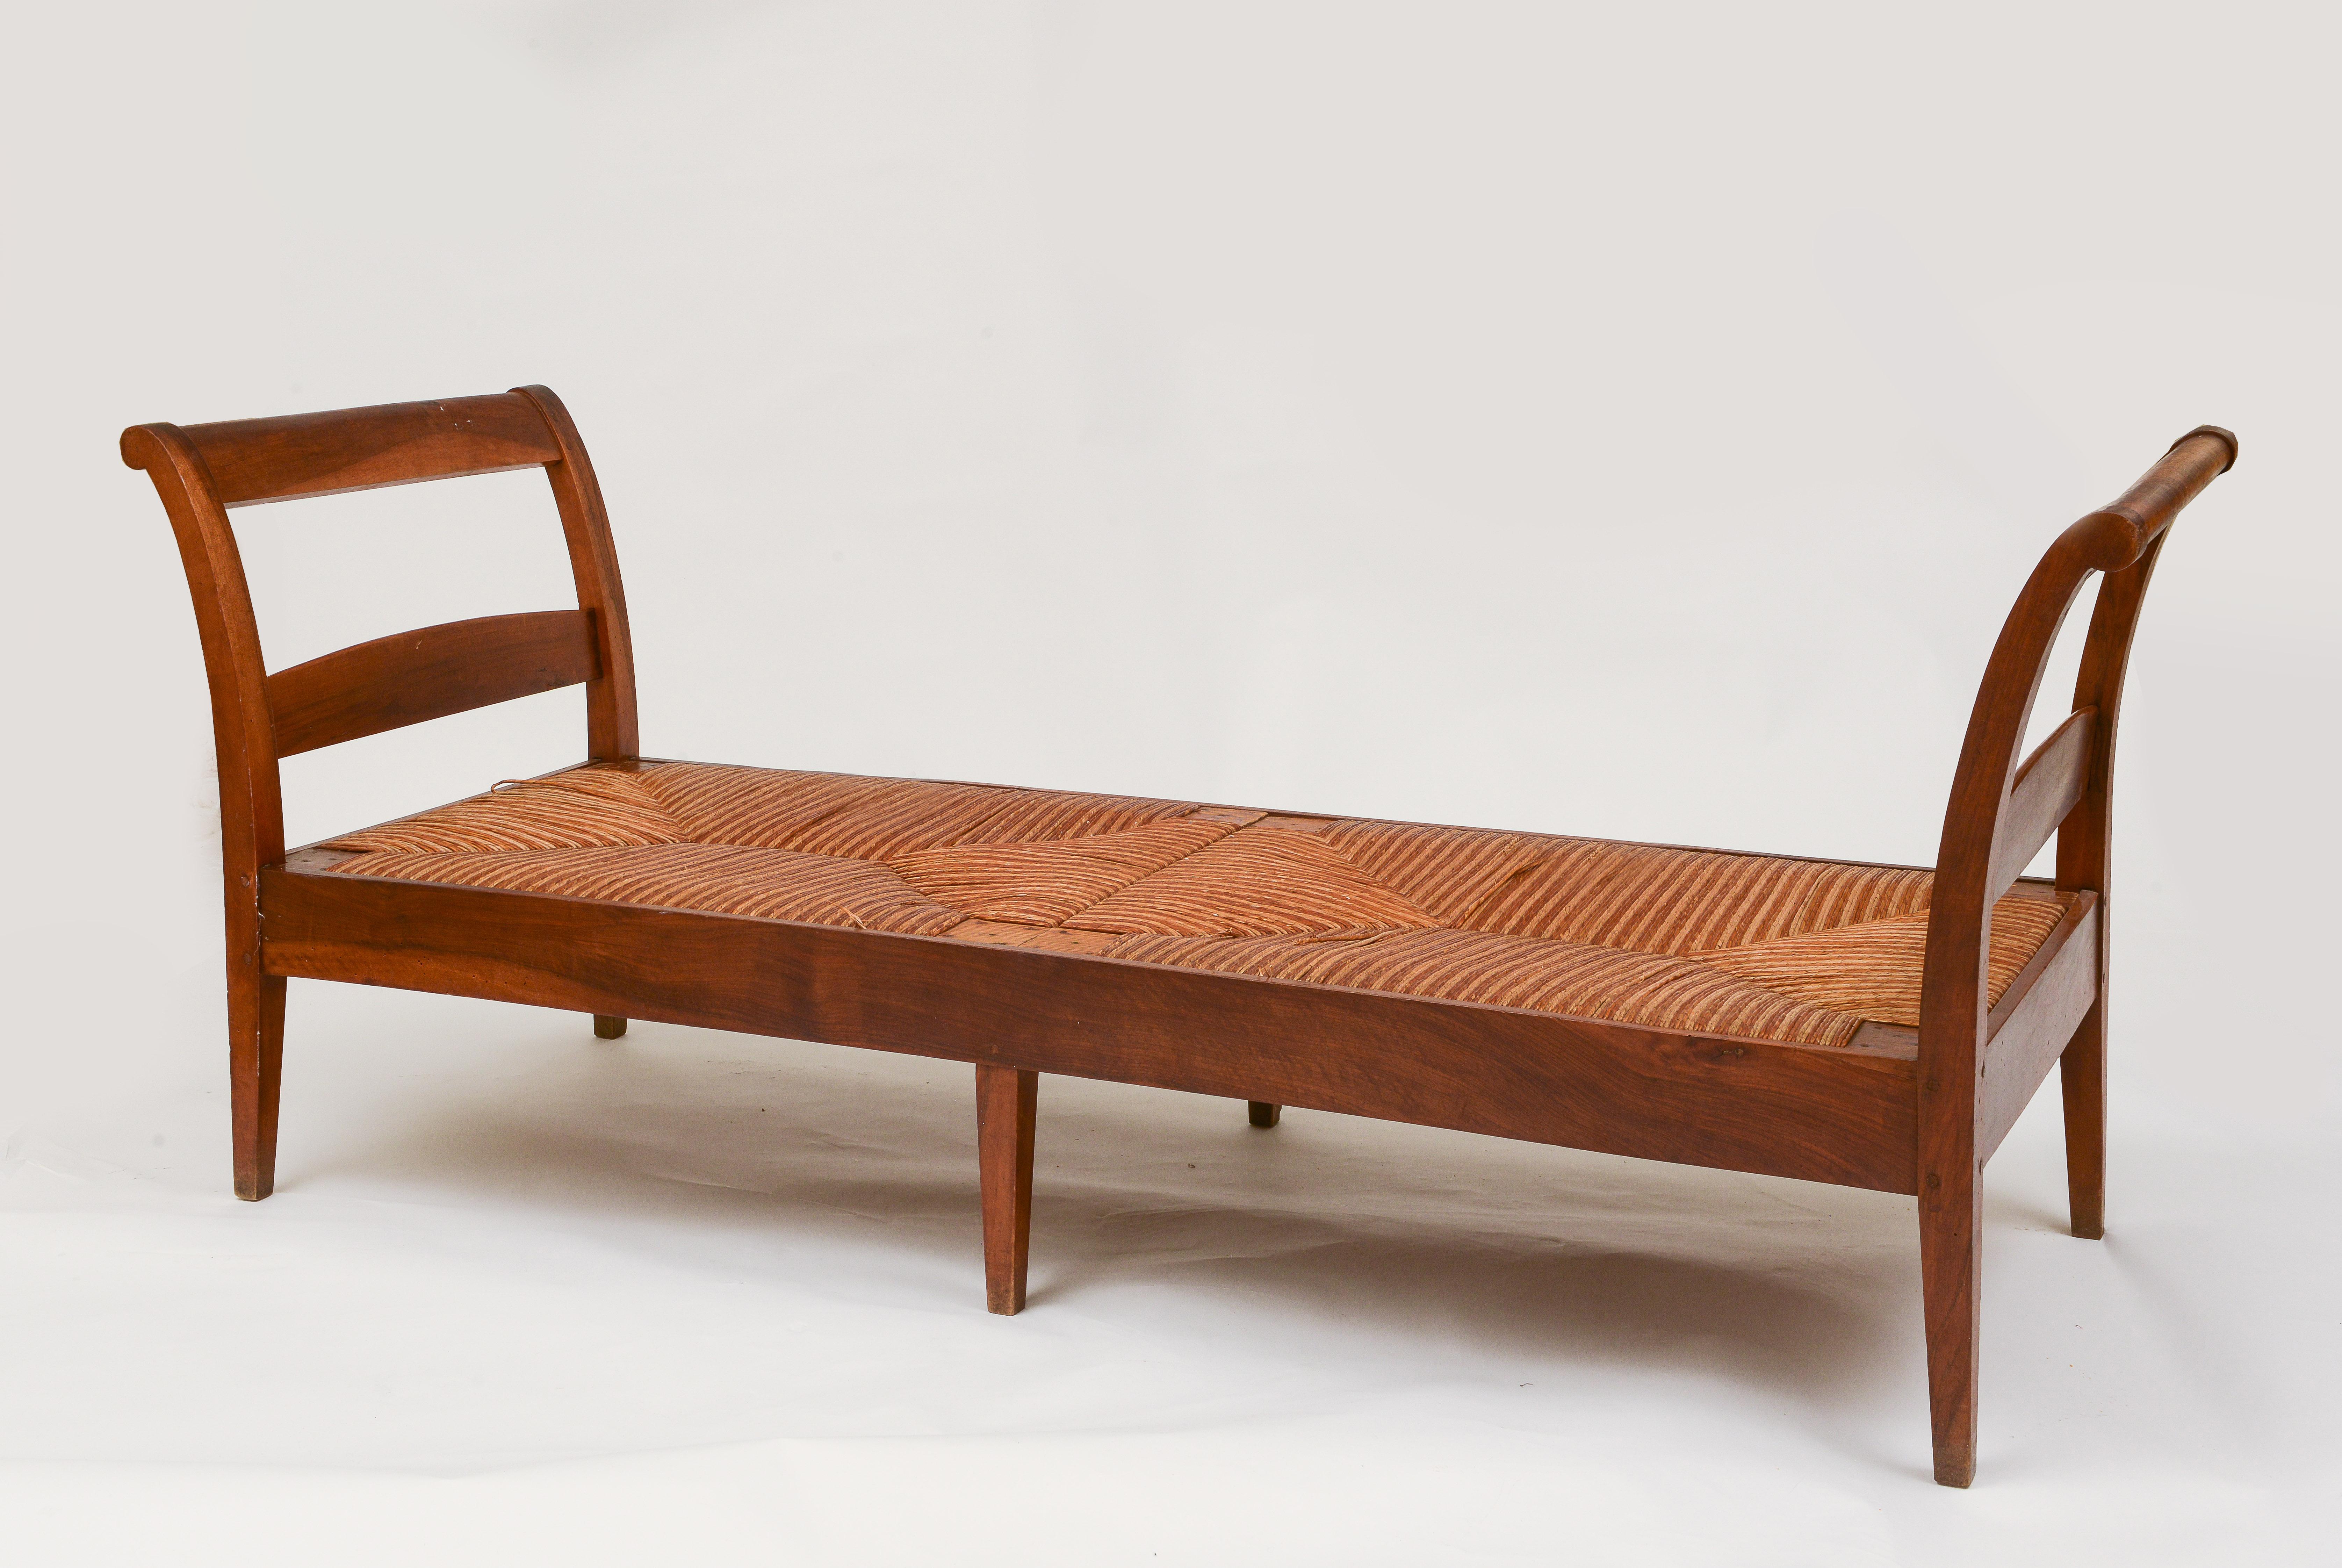 Beautiful wood woven bench. Beautiful details. Could be used as a bench or daybed.
   